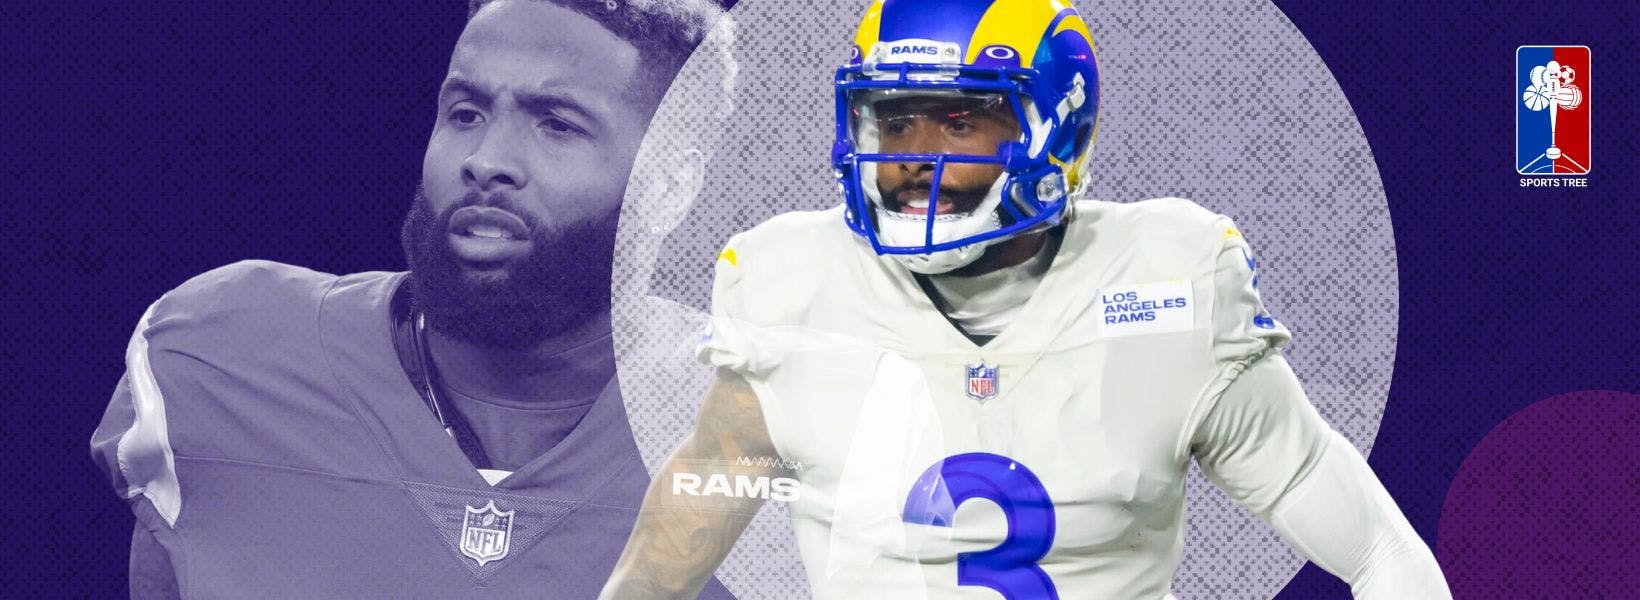 Ravens sign Odell OBJ Beckham to a one-year contract